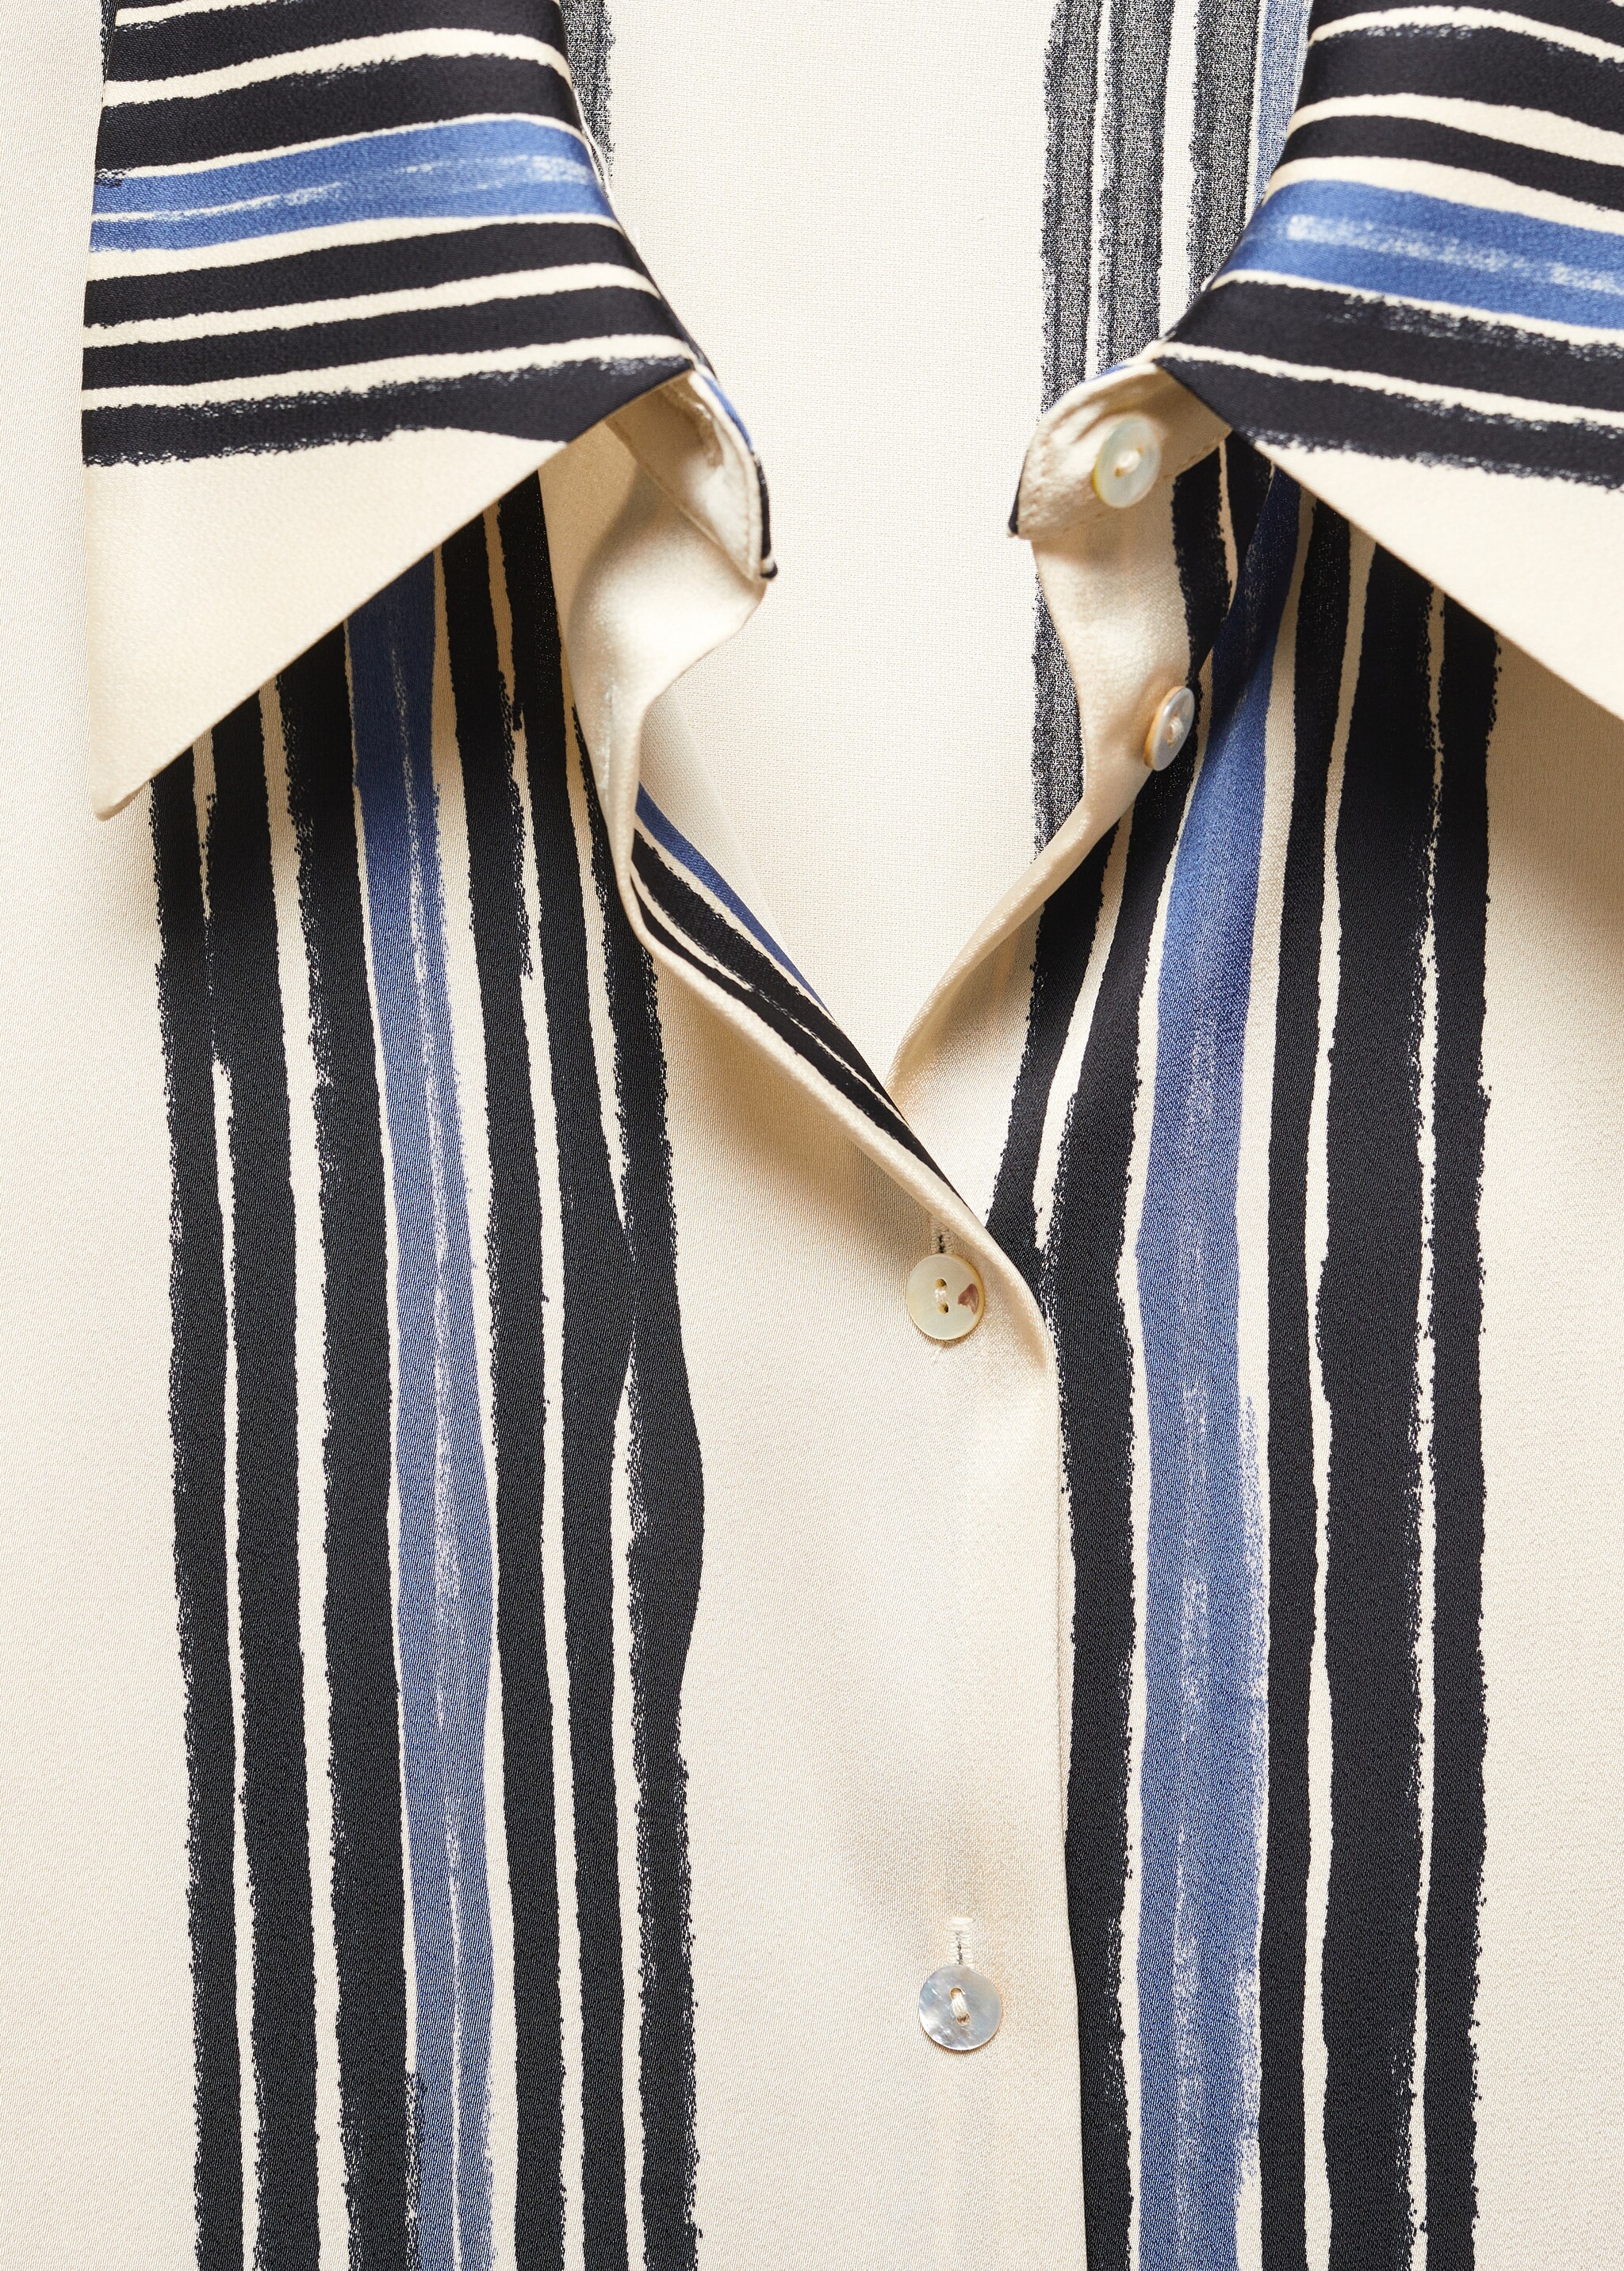 Satin striped shirt - Details of the article 8